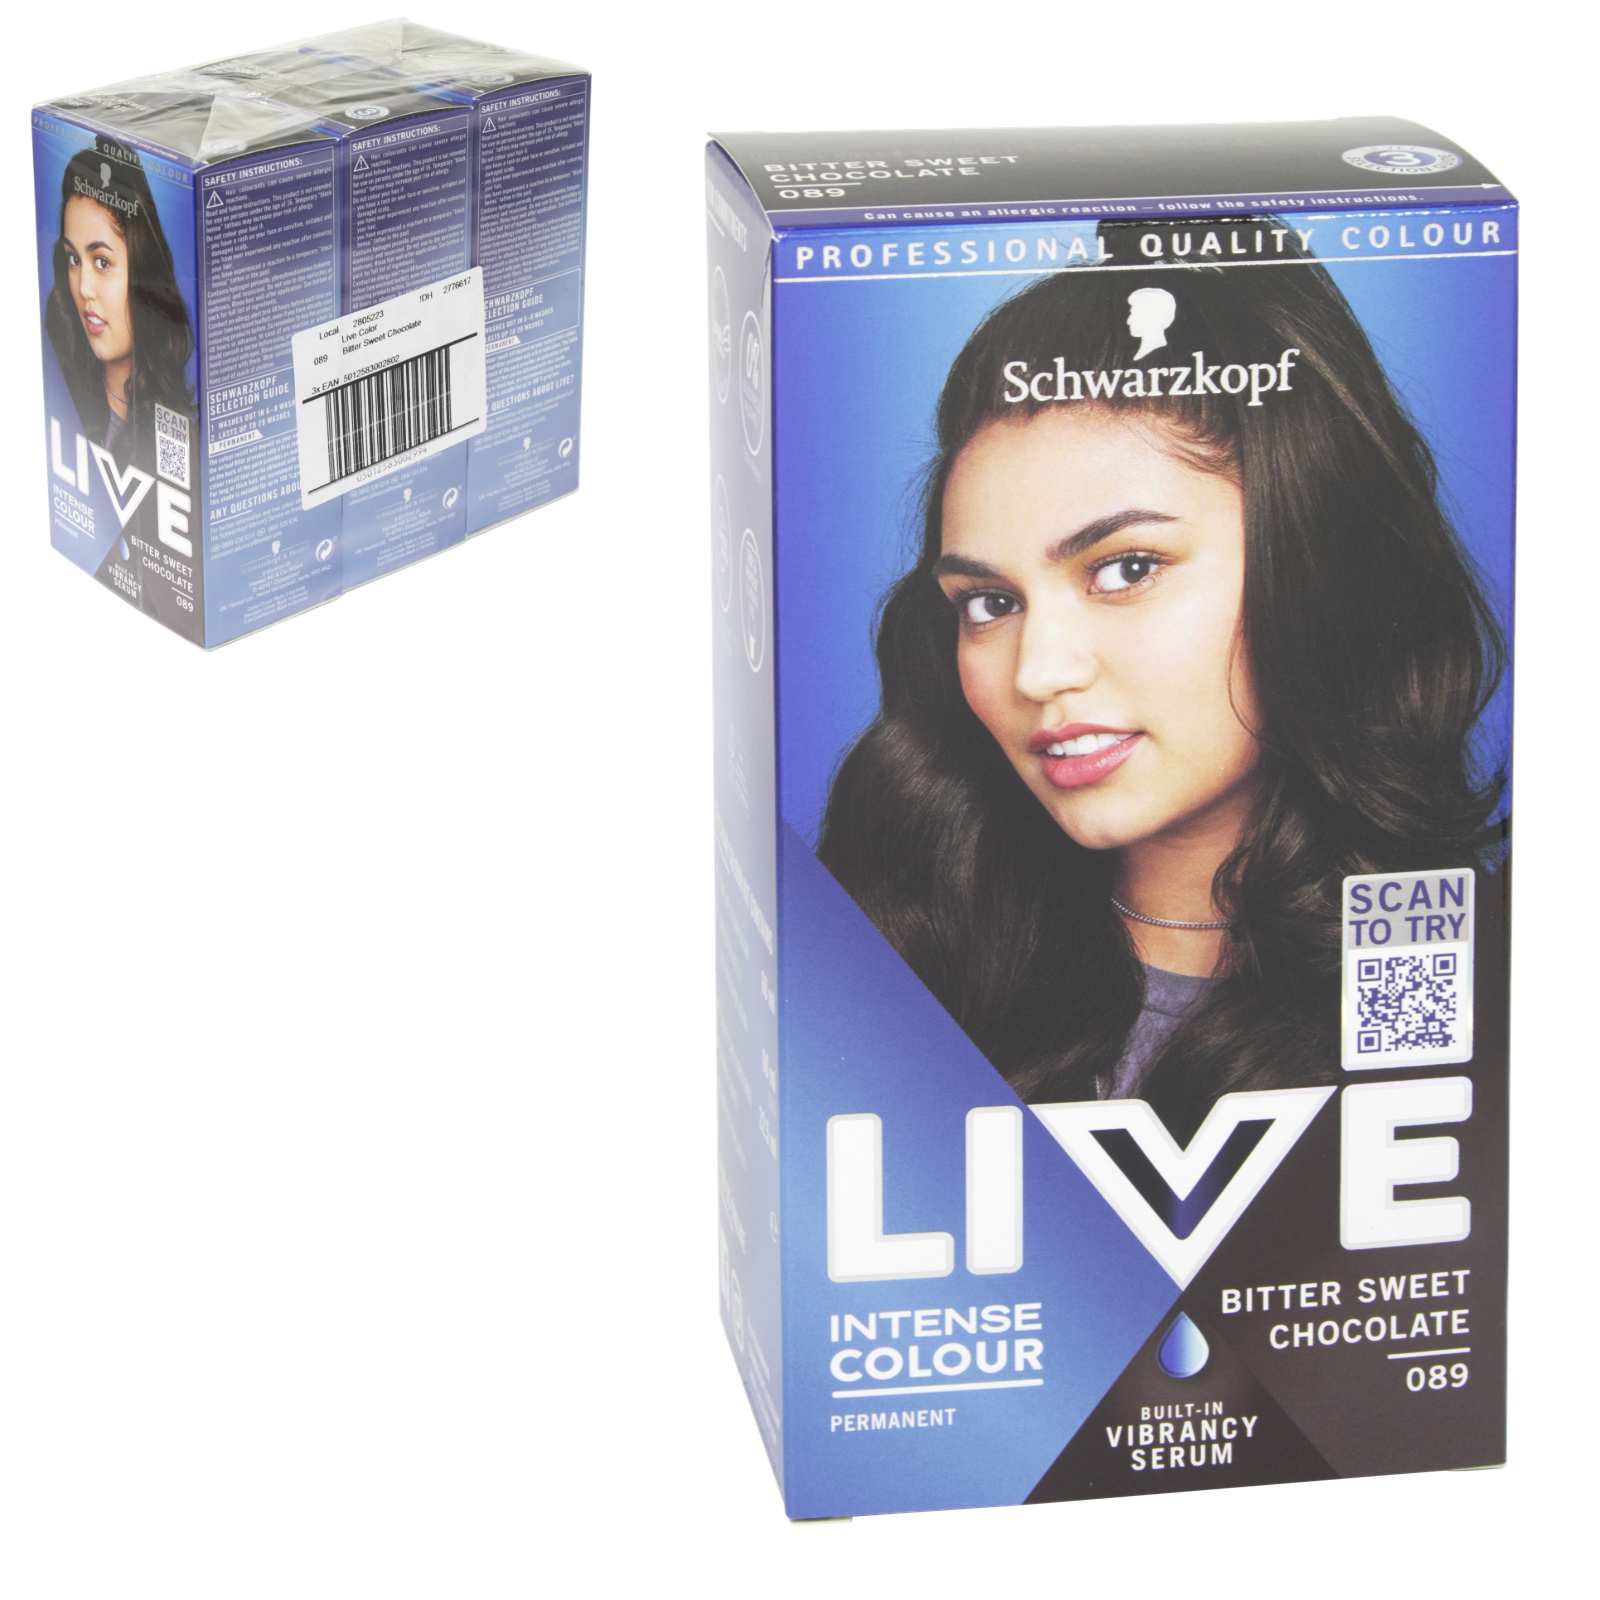 Schwarzkopf Live Bittersweet Chocolate 089 Permanent Hair Dye - Concord  Cash and Carry